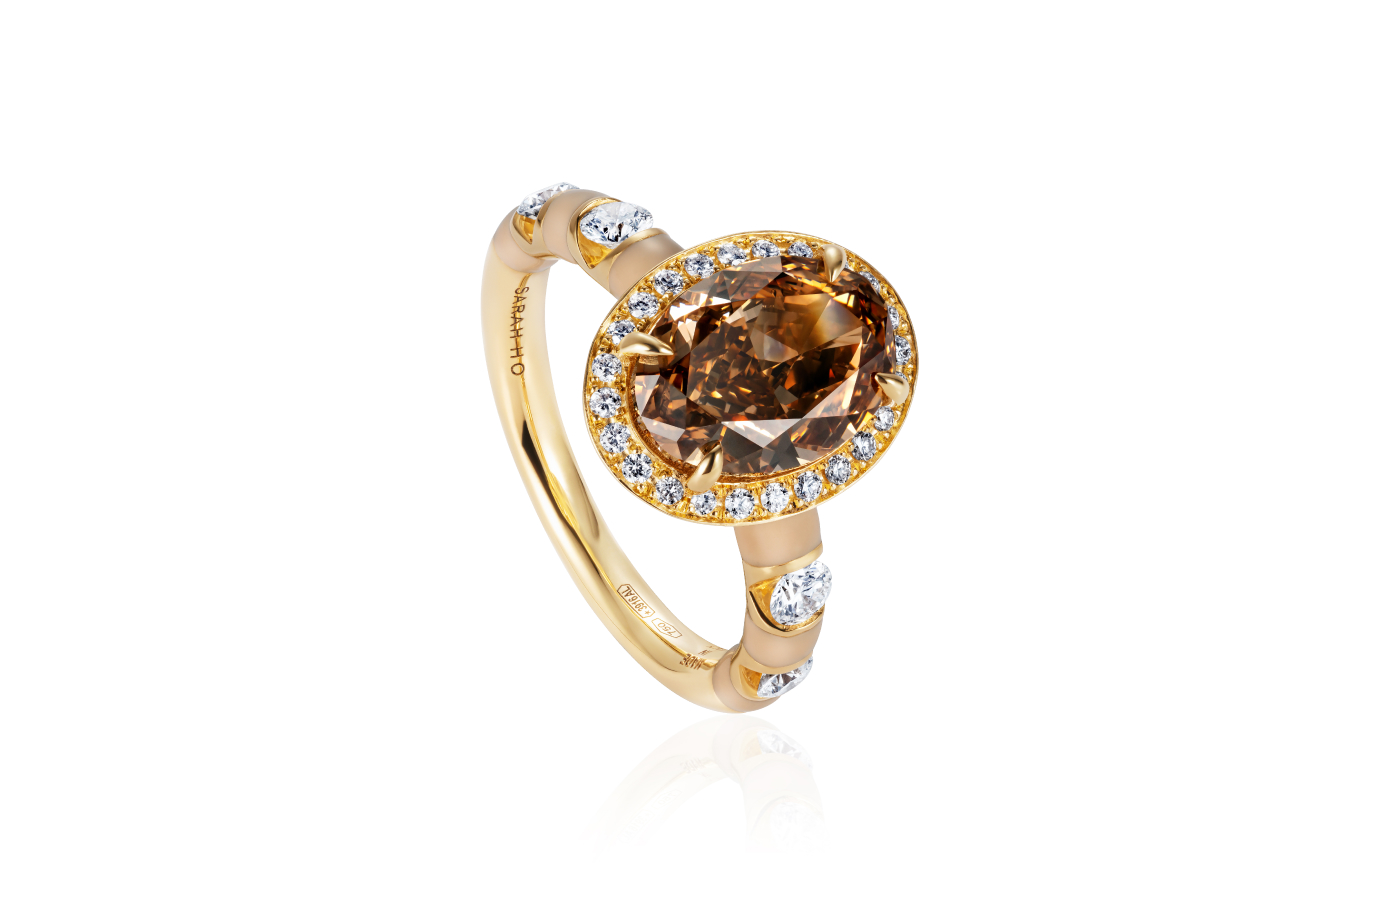  Sarah Ho Candy Cane Toffee ring in gold and diamond featuring a 3-ct toffee-coloured oval diamond